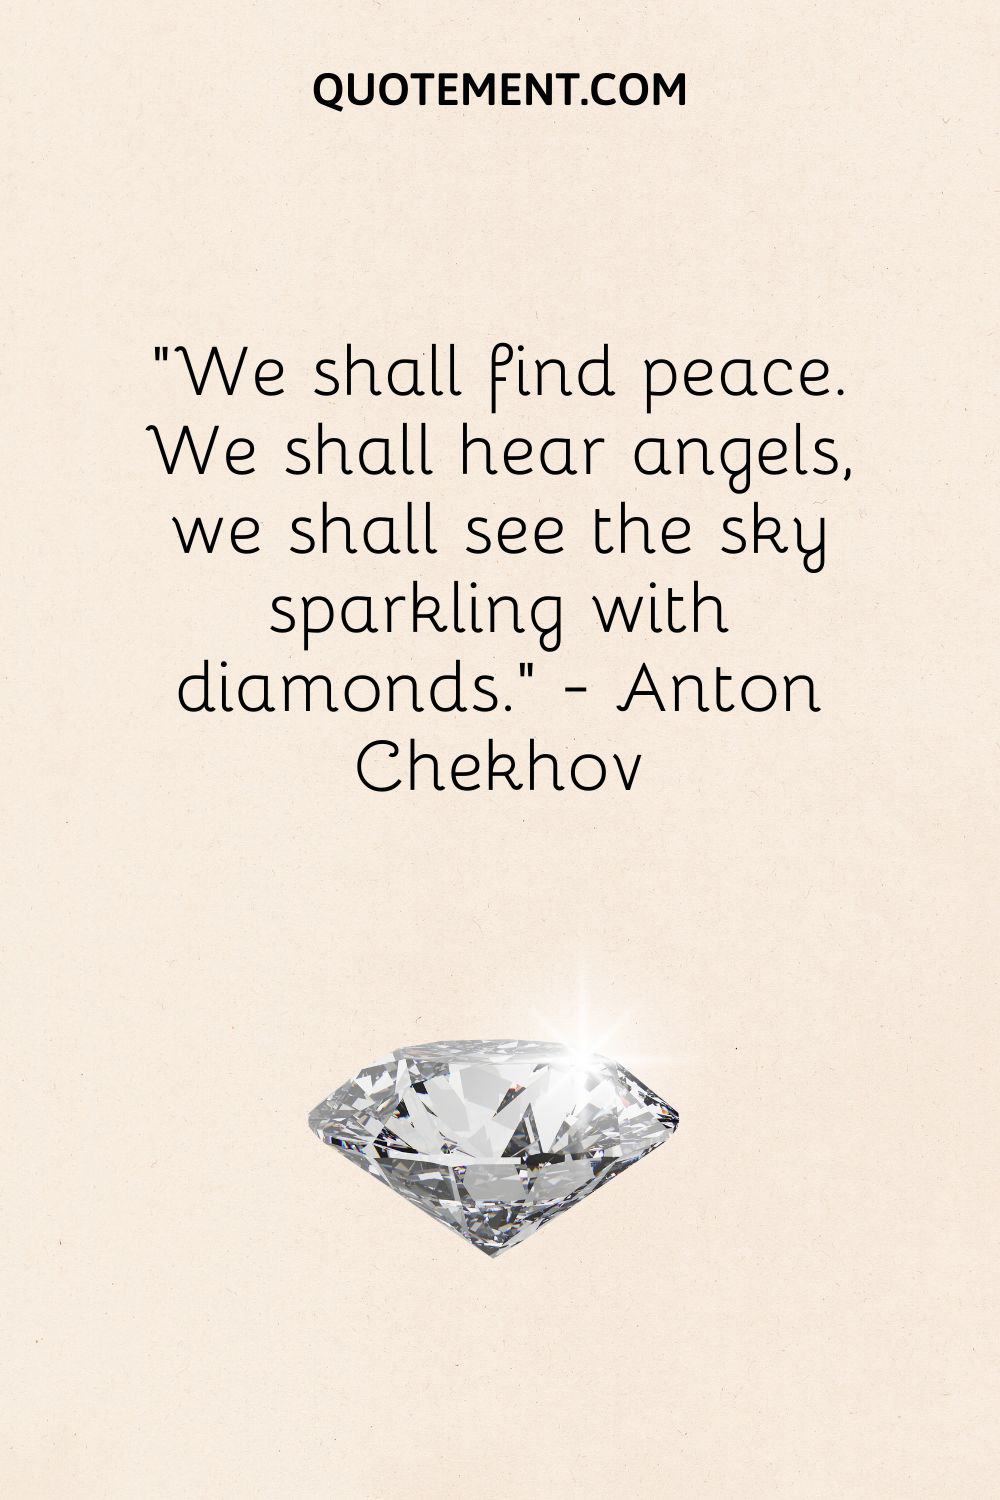 We shall find peace. We shall hear angels, we shall see the sky sparkling with diamonds